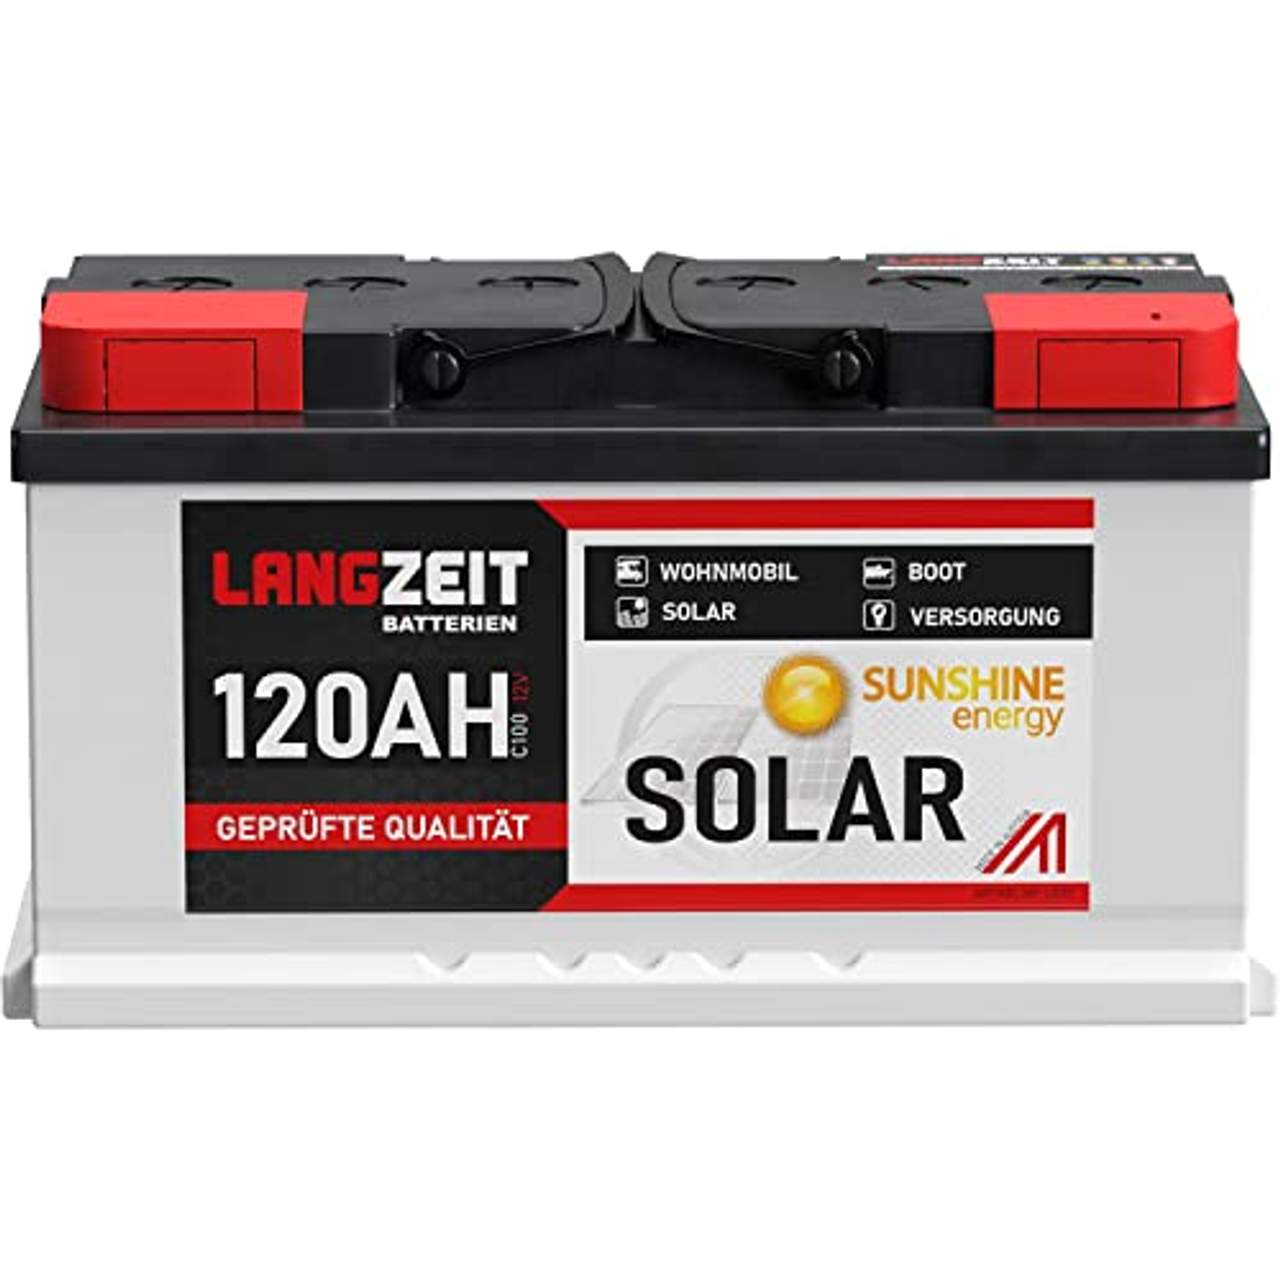 Solarbatterie 120Ah 12V Wohnmobil Boot Wohnwagen Camping